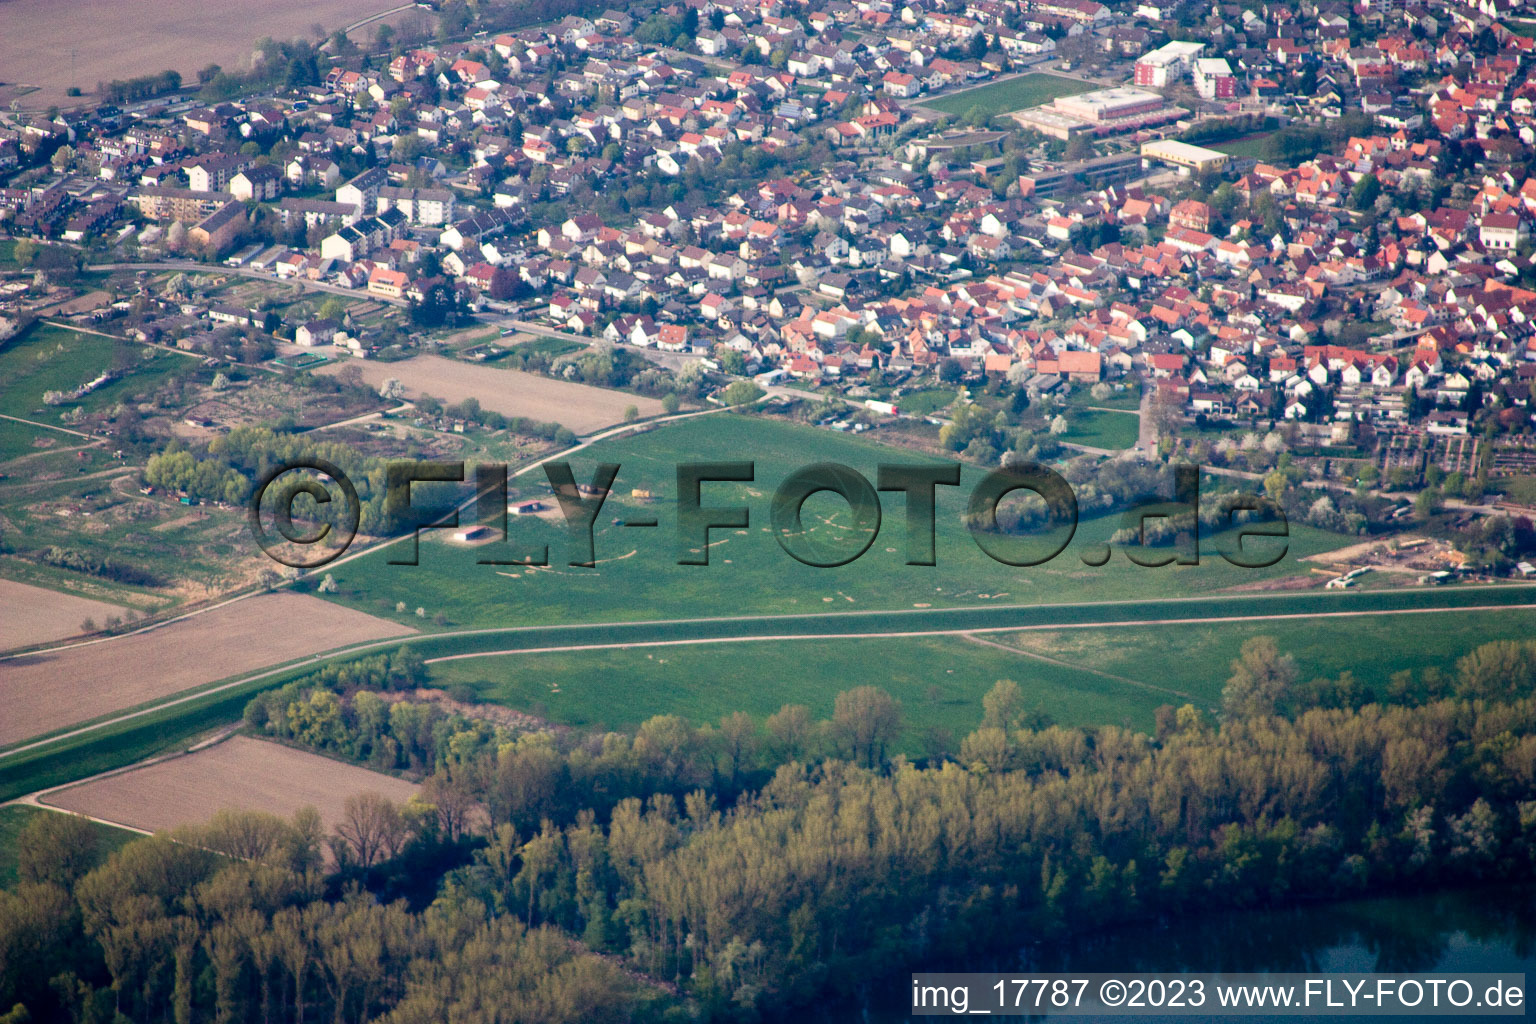 Neuburg in the state Rhineland-Palatinate, Germany seen from above